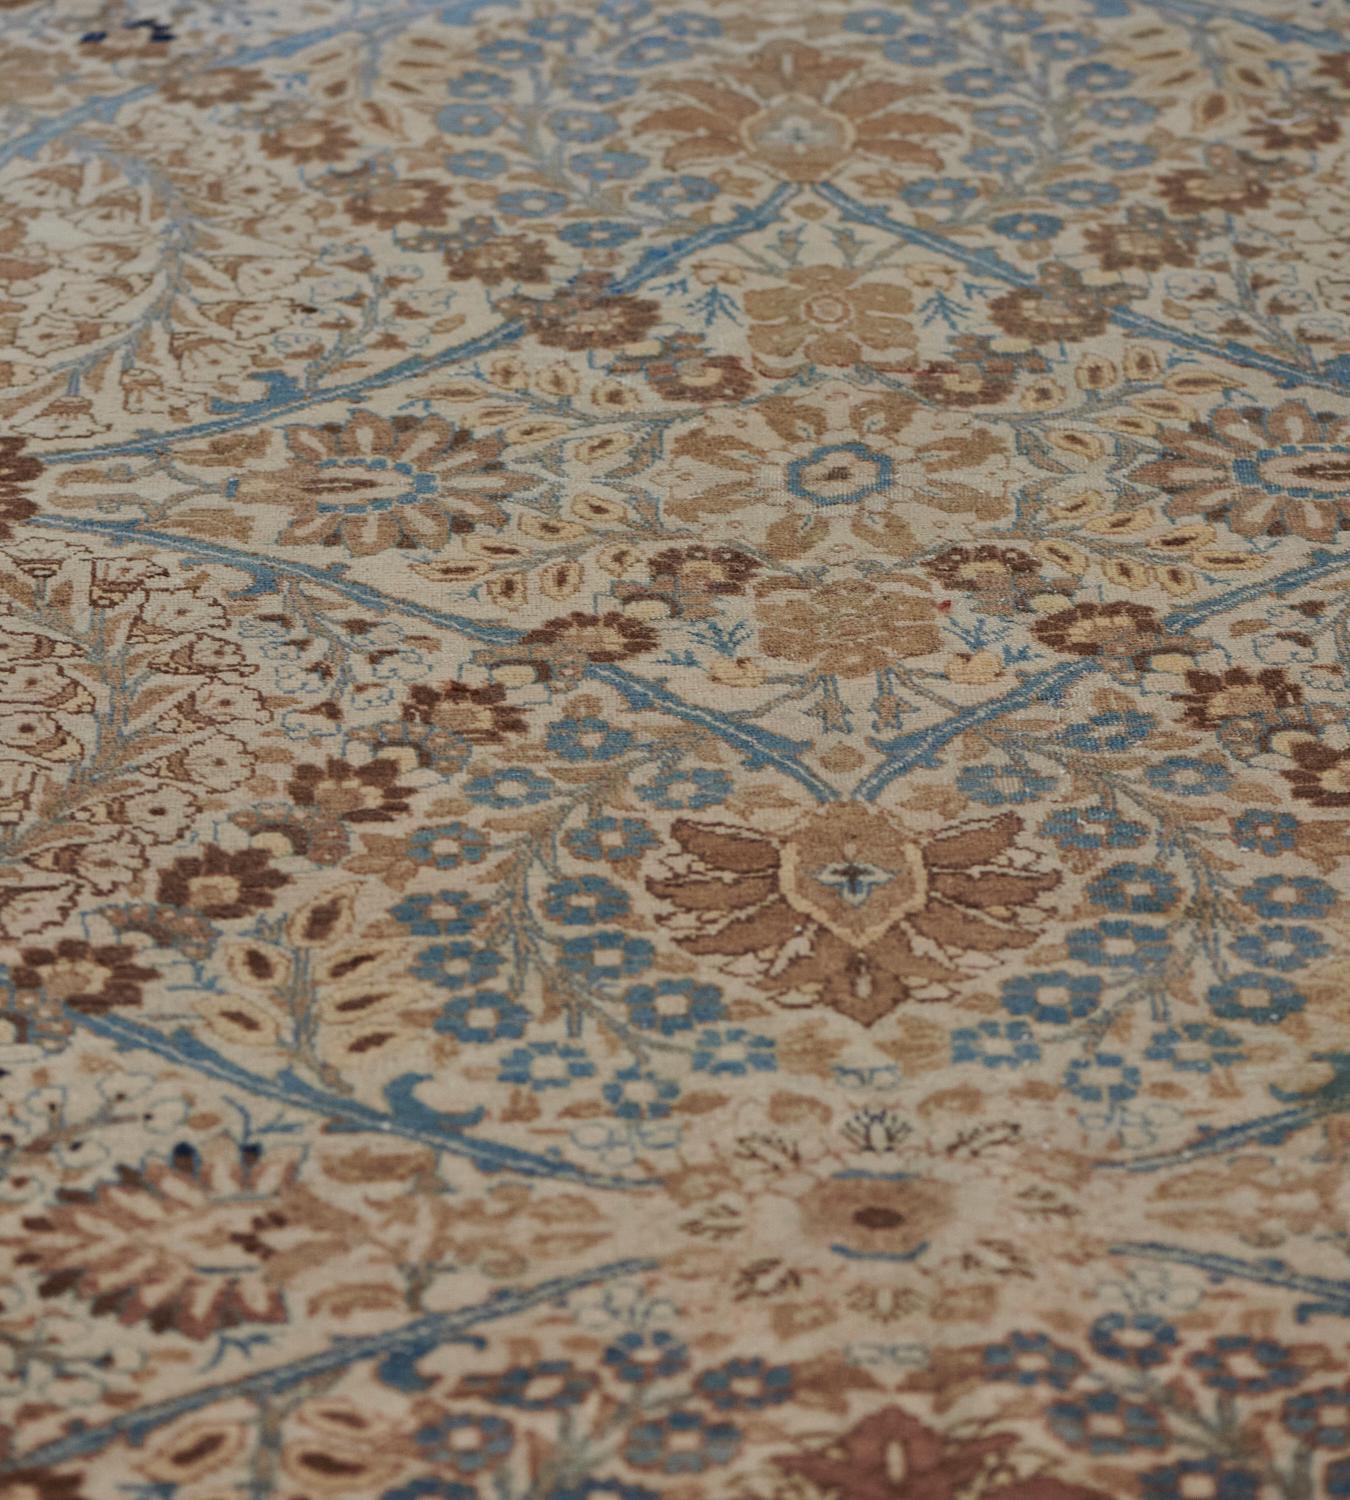 This antique Tabriz rug has a shaded ivory field with an overall design of mole-brown and light blue palmettes linked by horizontal light blue curved lattices forming a diamond lozenge enclosing a central palmette issuing delicate floral and